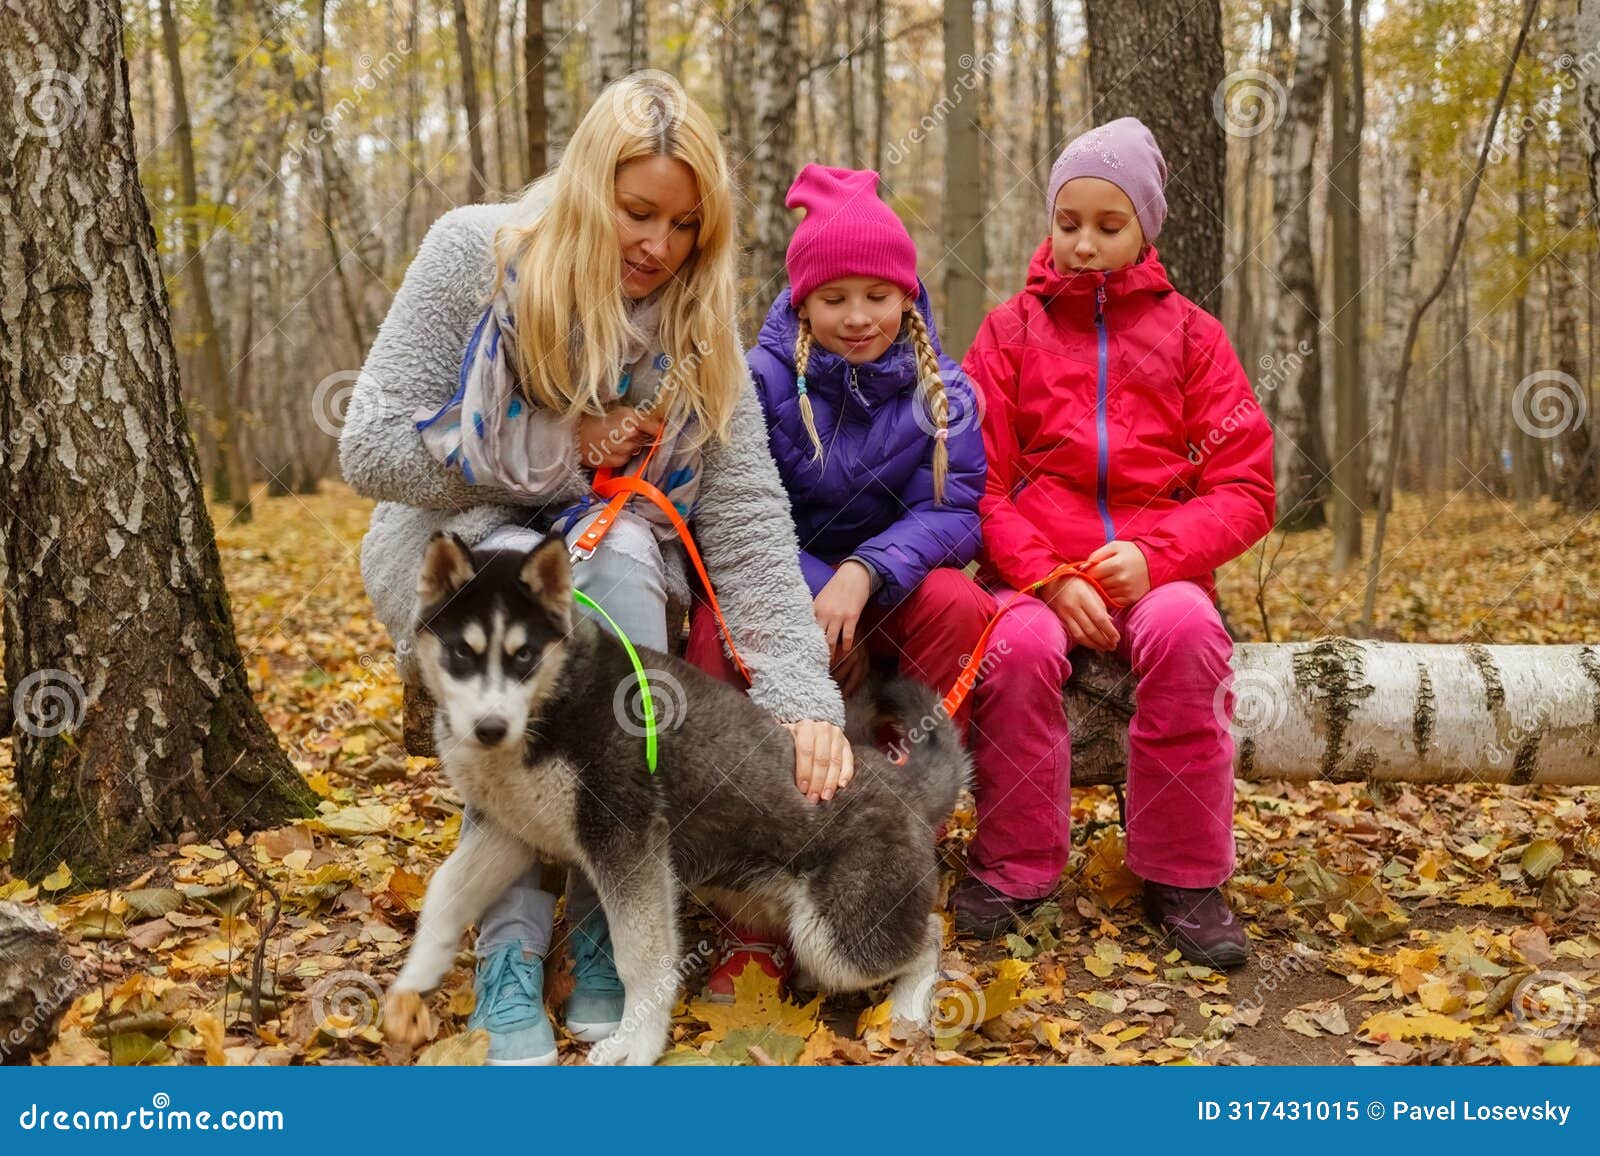 mother and two daughters with dog breed husky